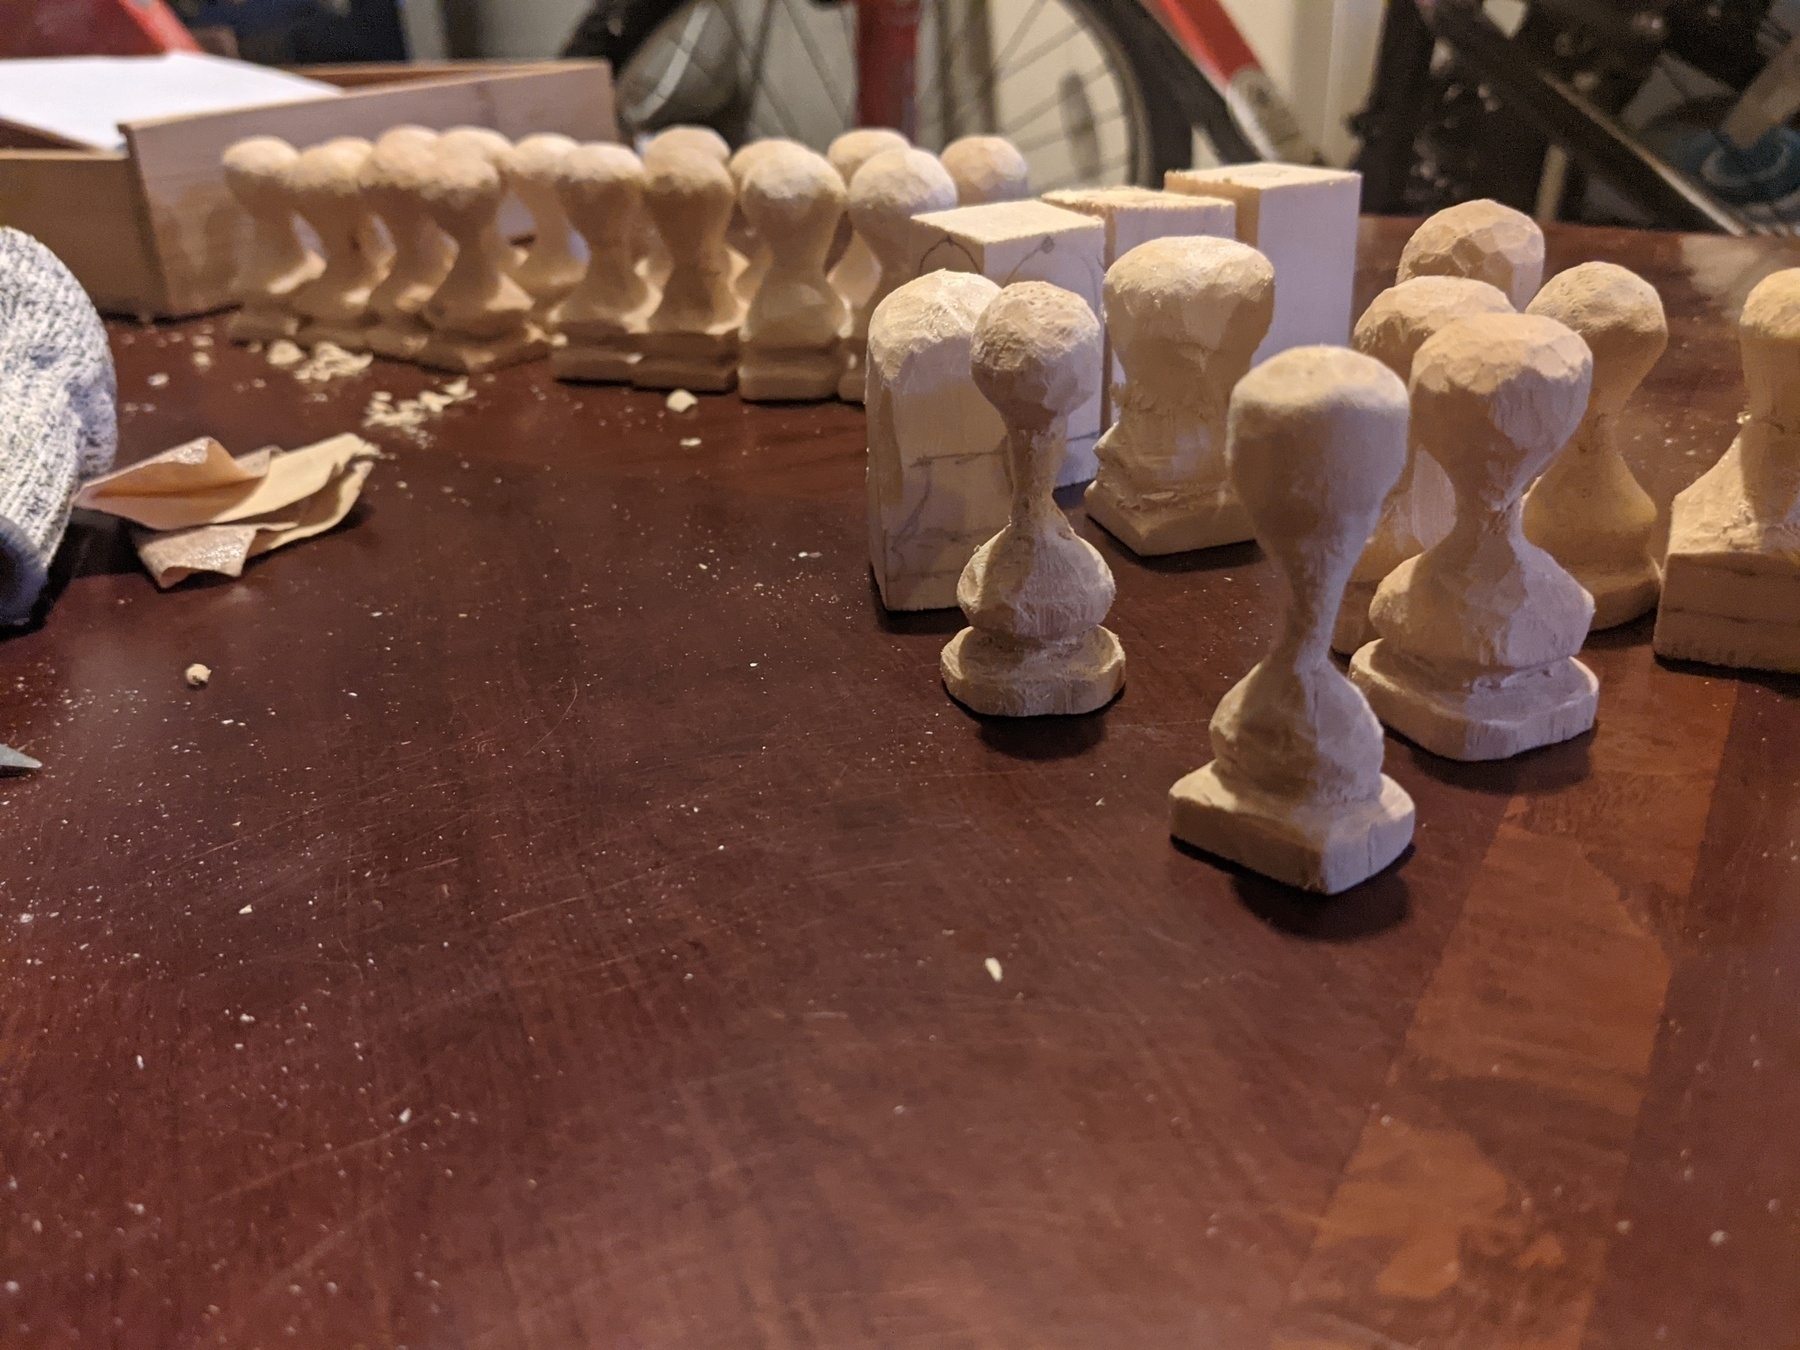 16 good pawns and 12 bad ones